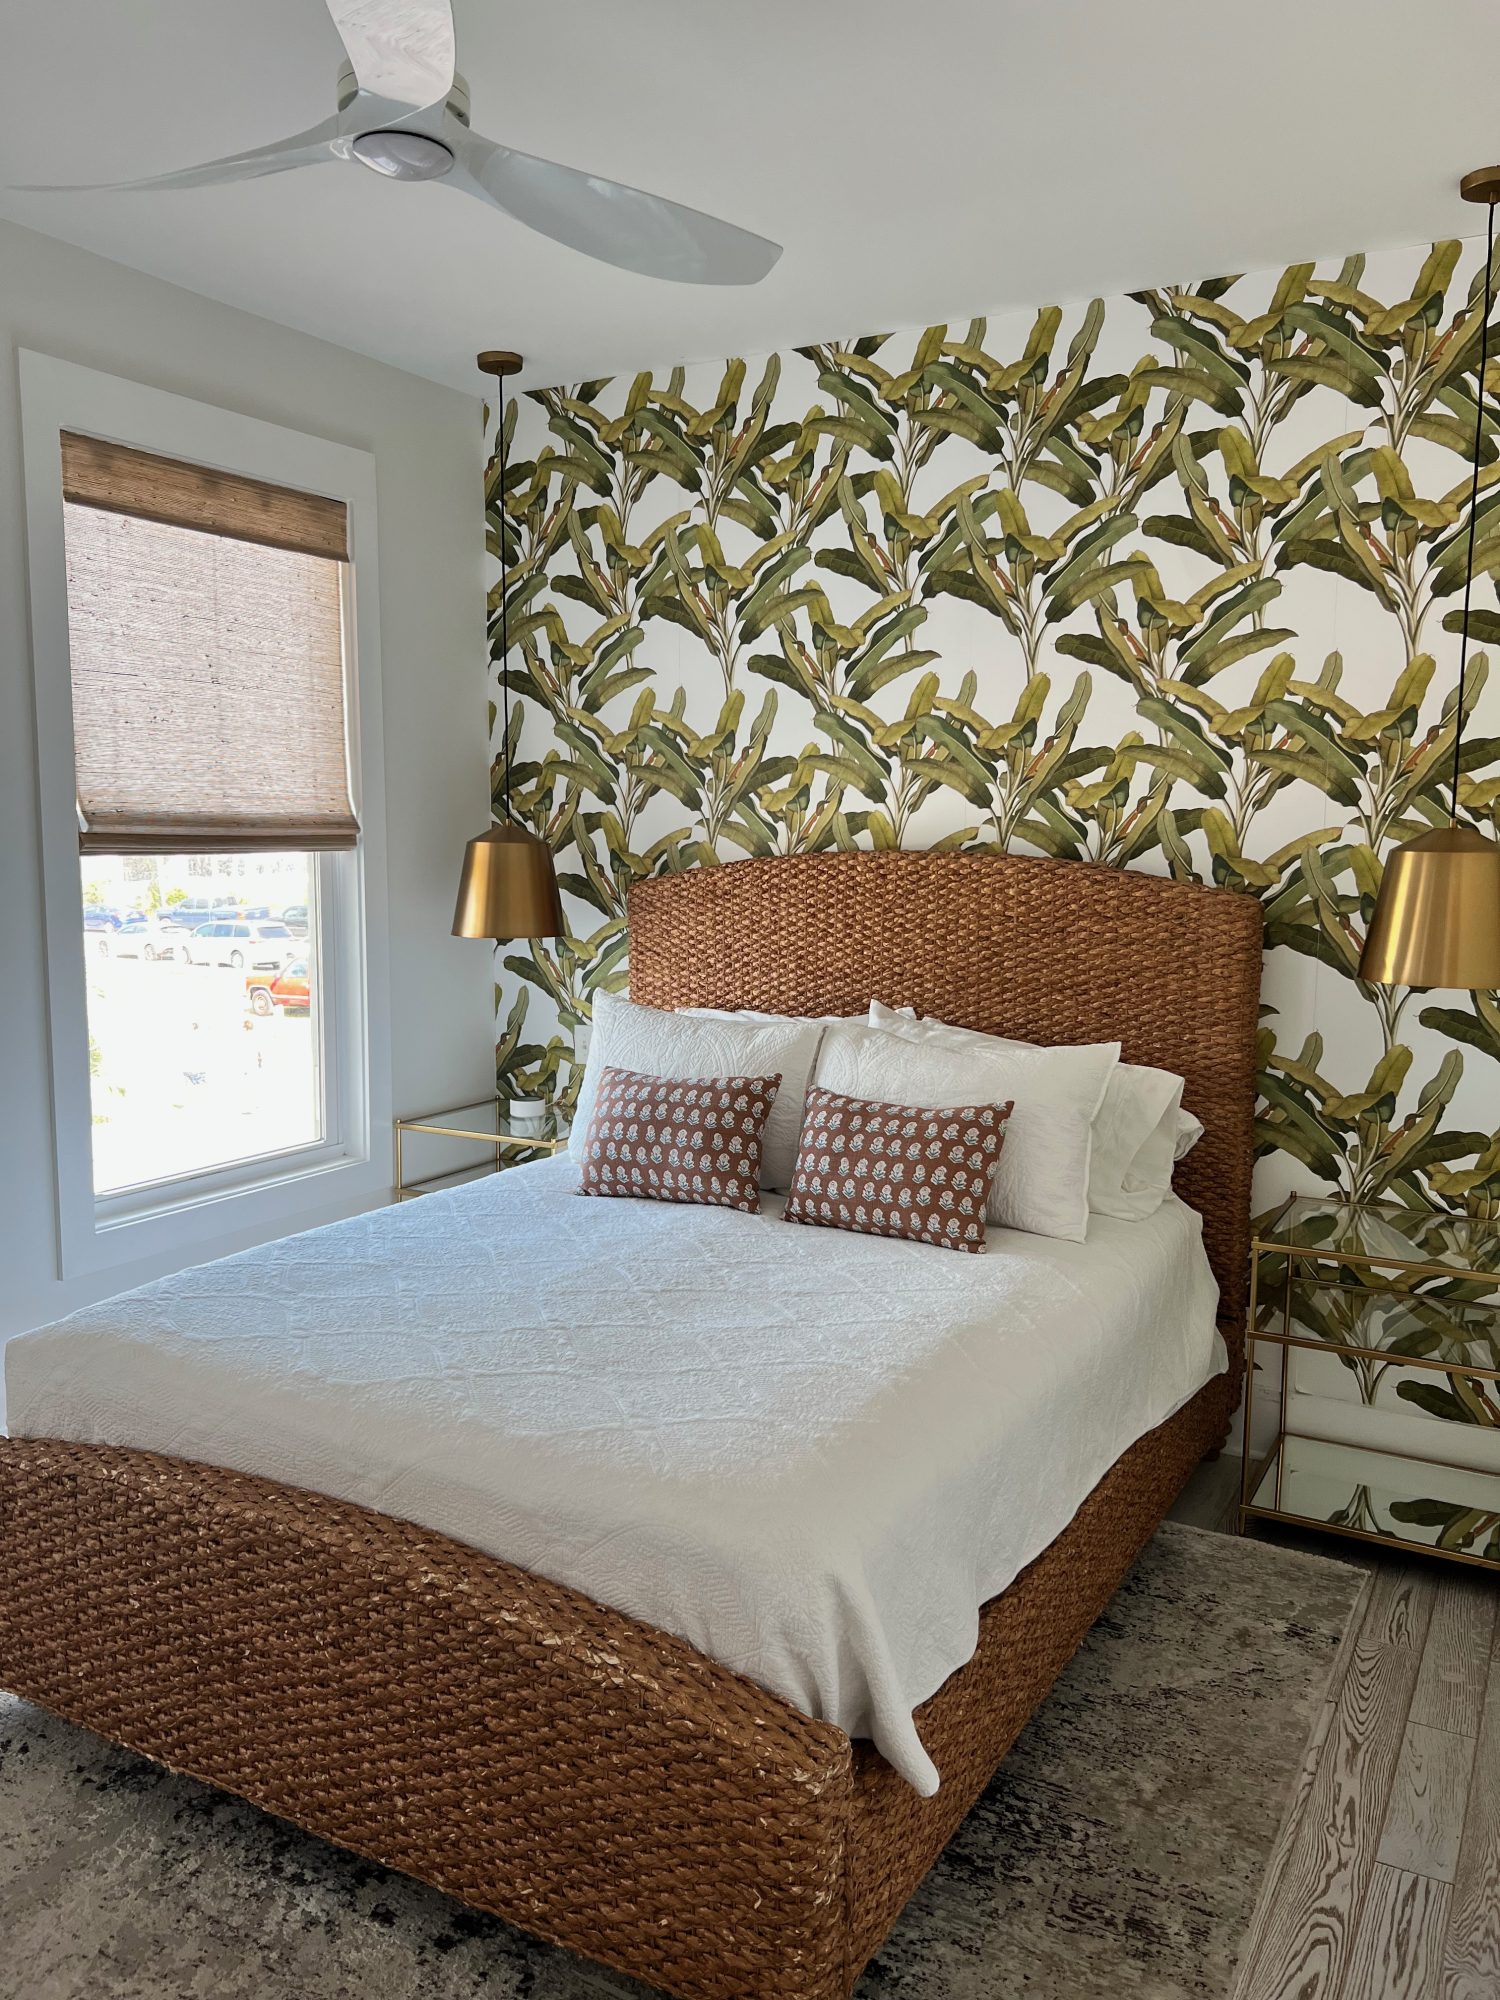 white linen bed with whicker bed frame on wall with palm tree wallpaper.